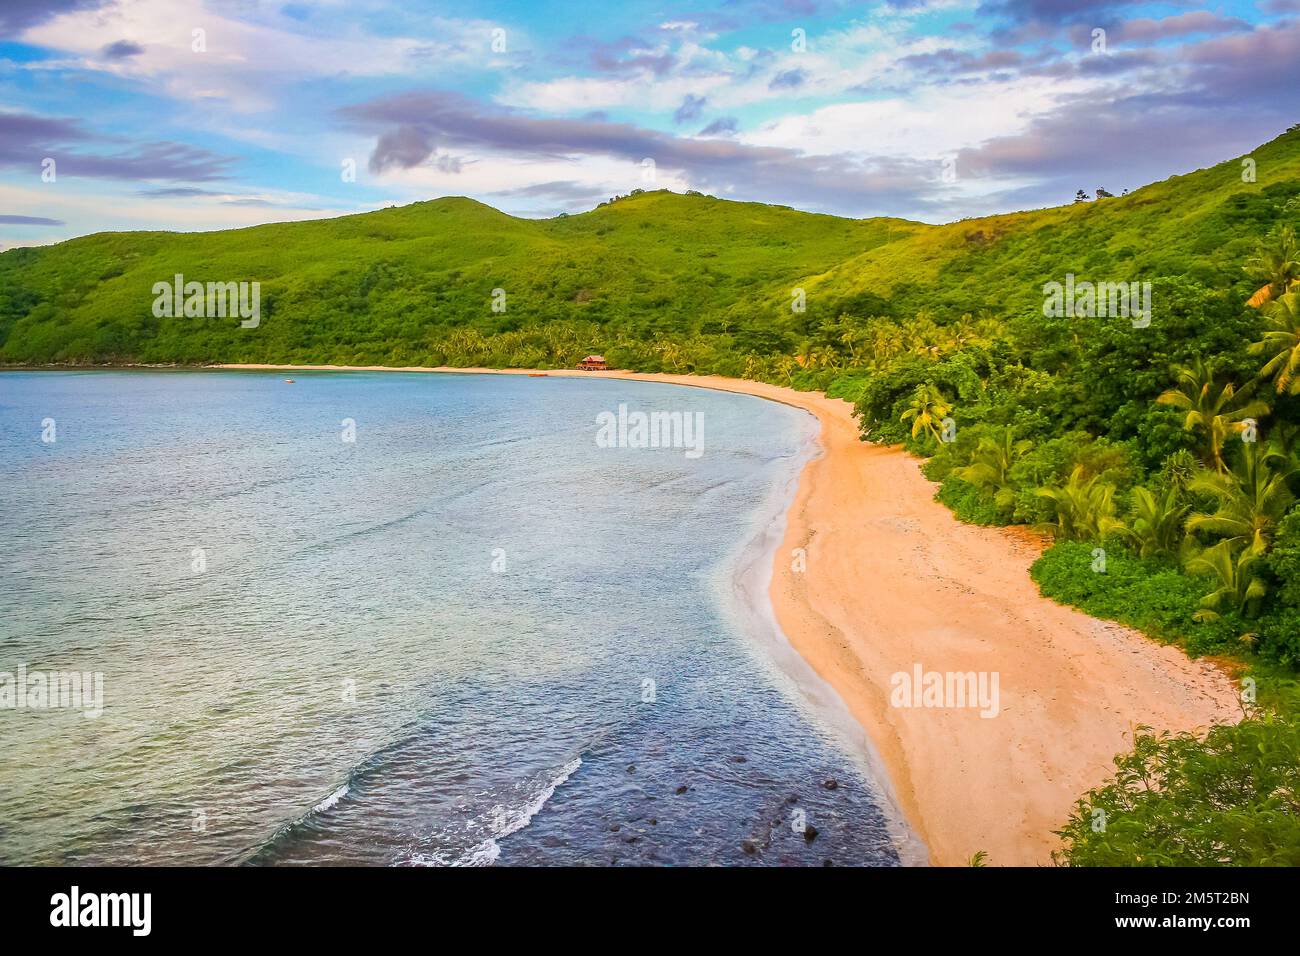 Tropical sandy beach at summer day in Fiji Islands, Pacific ocean Stock Photo